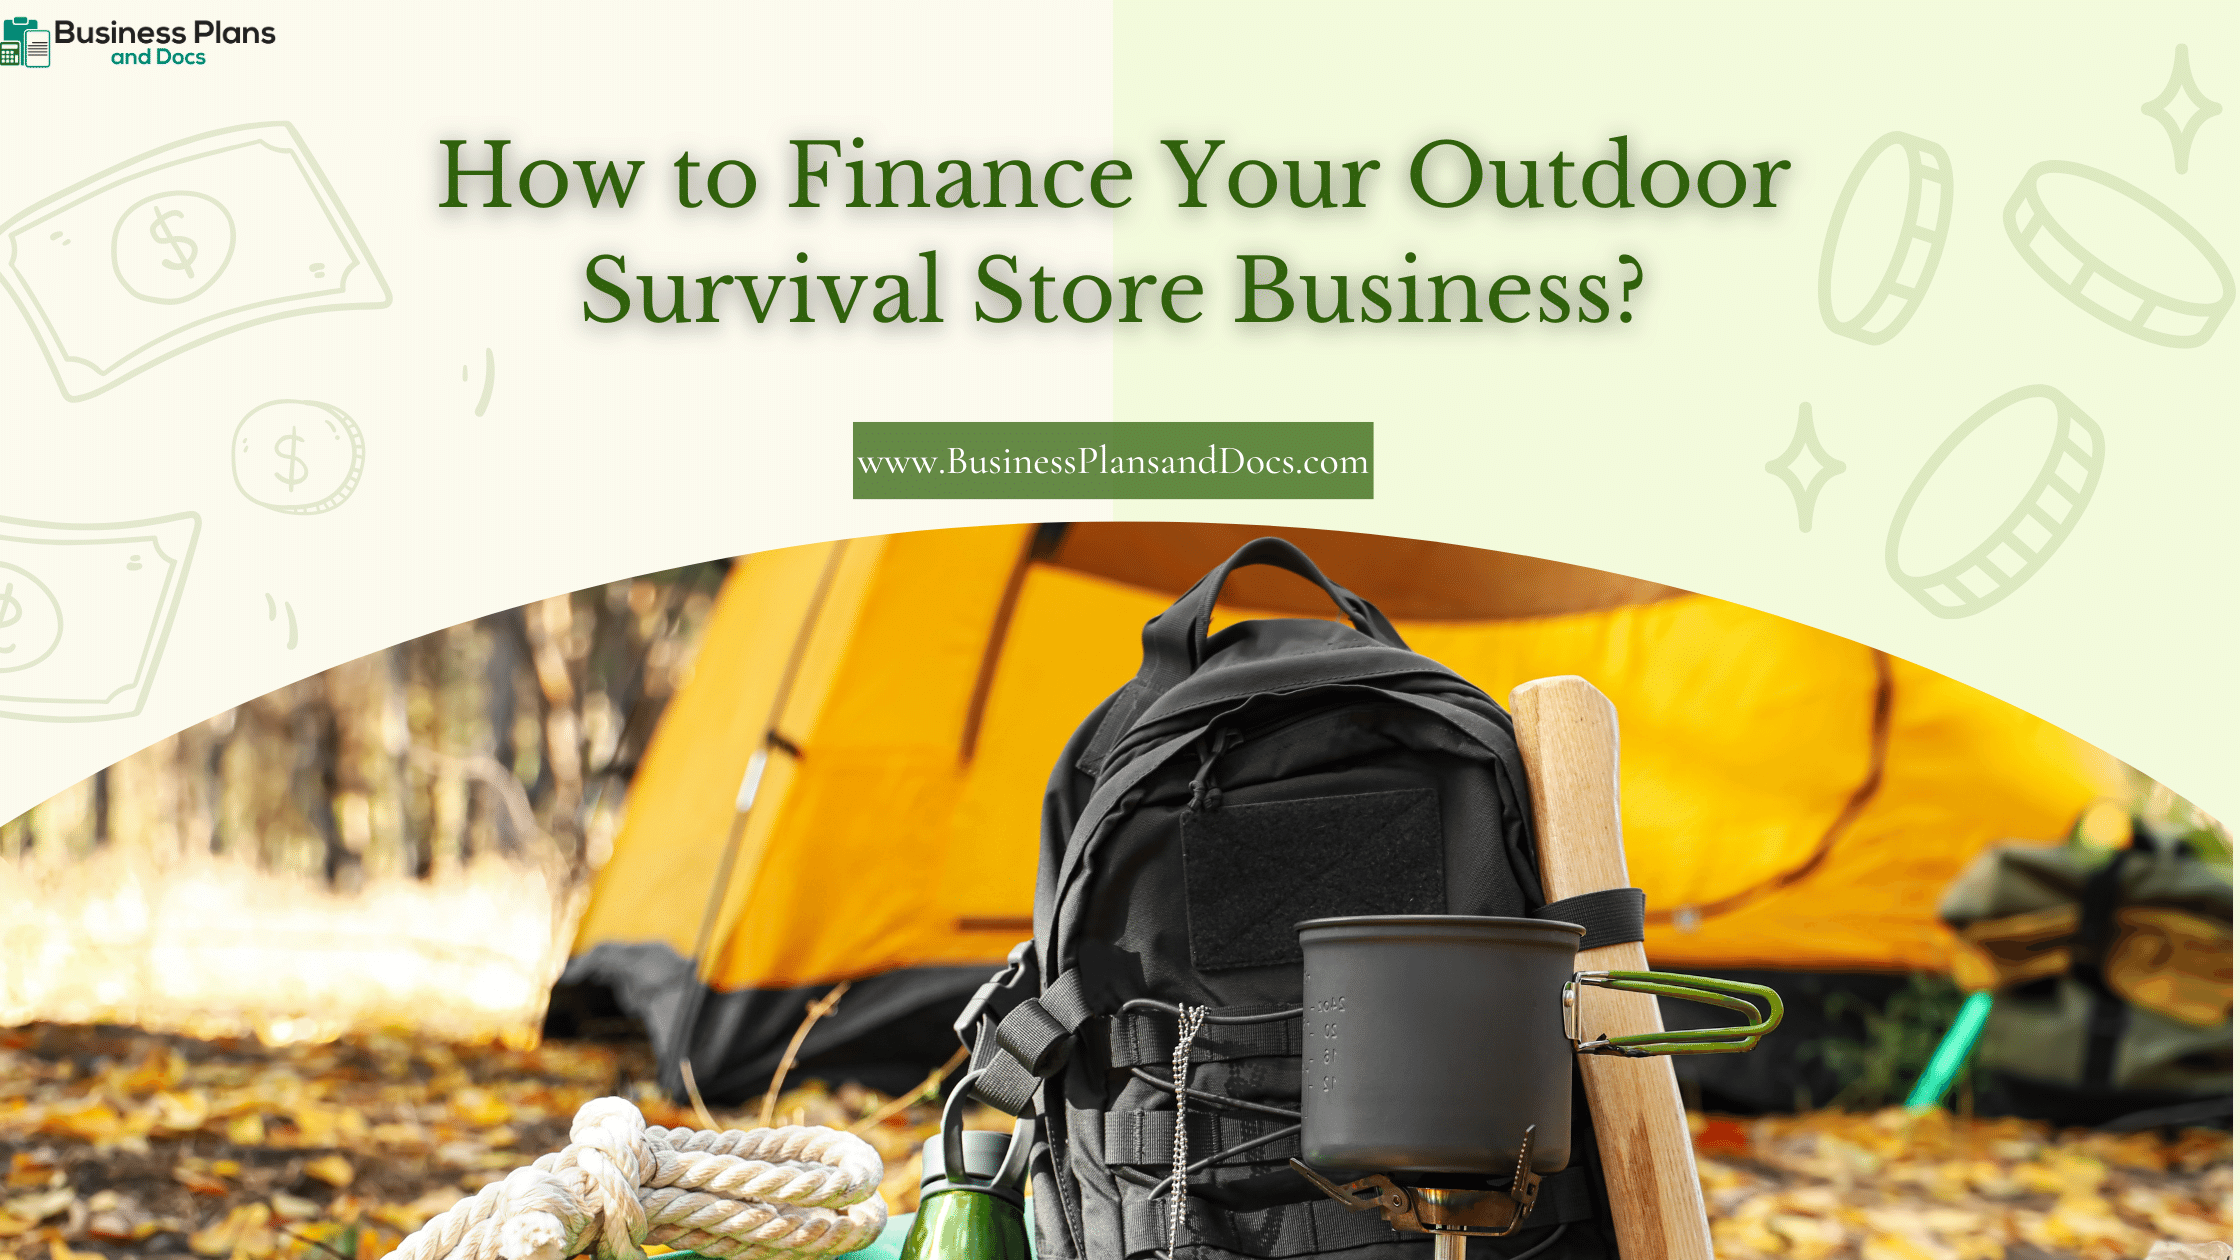 How to Finance Your Outdoor Survival Store Business?